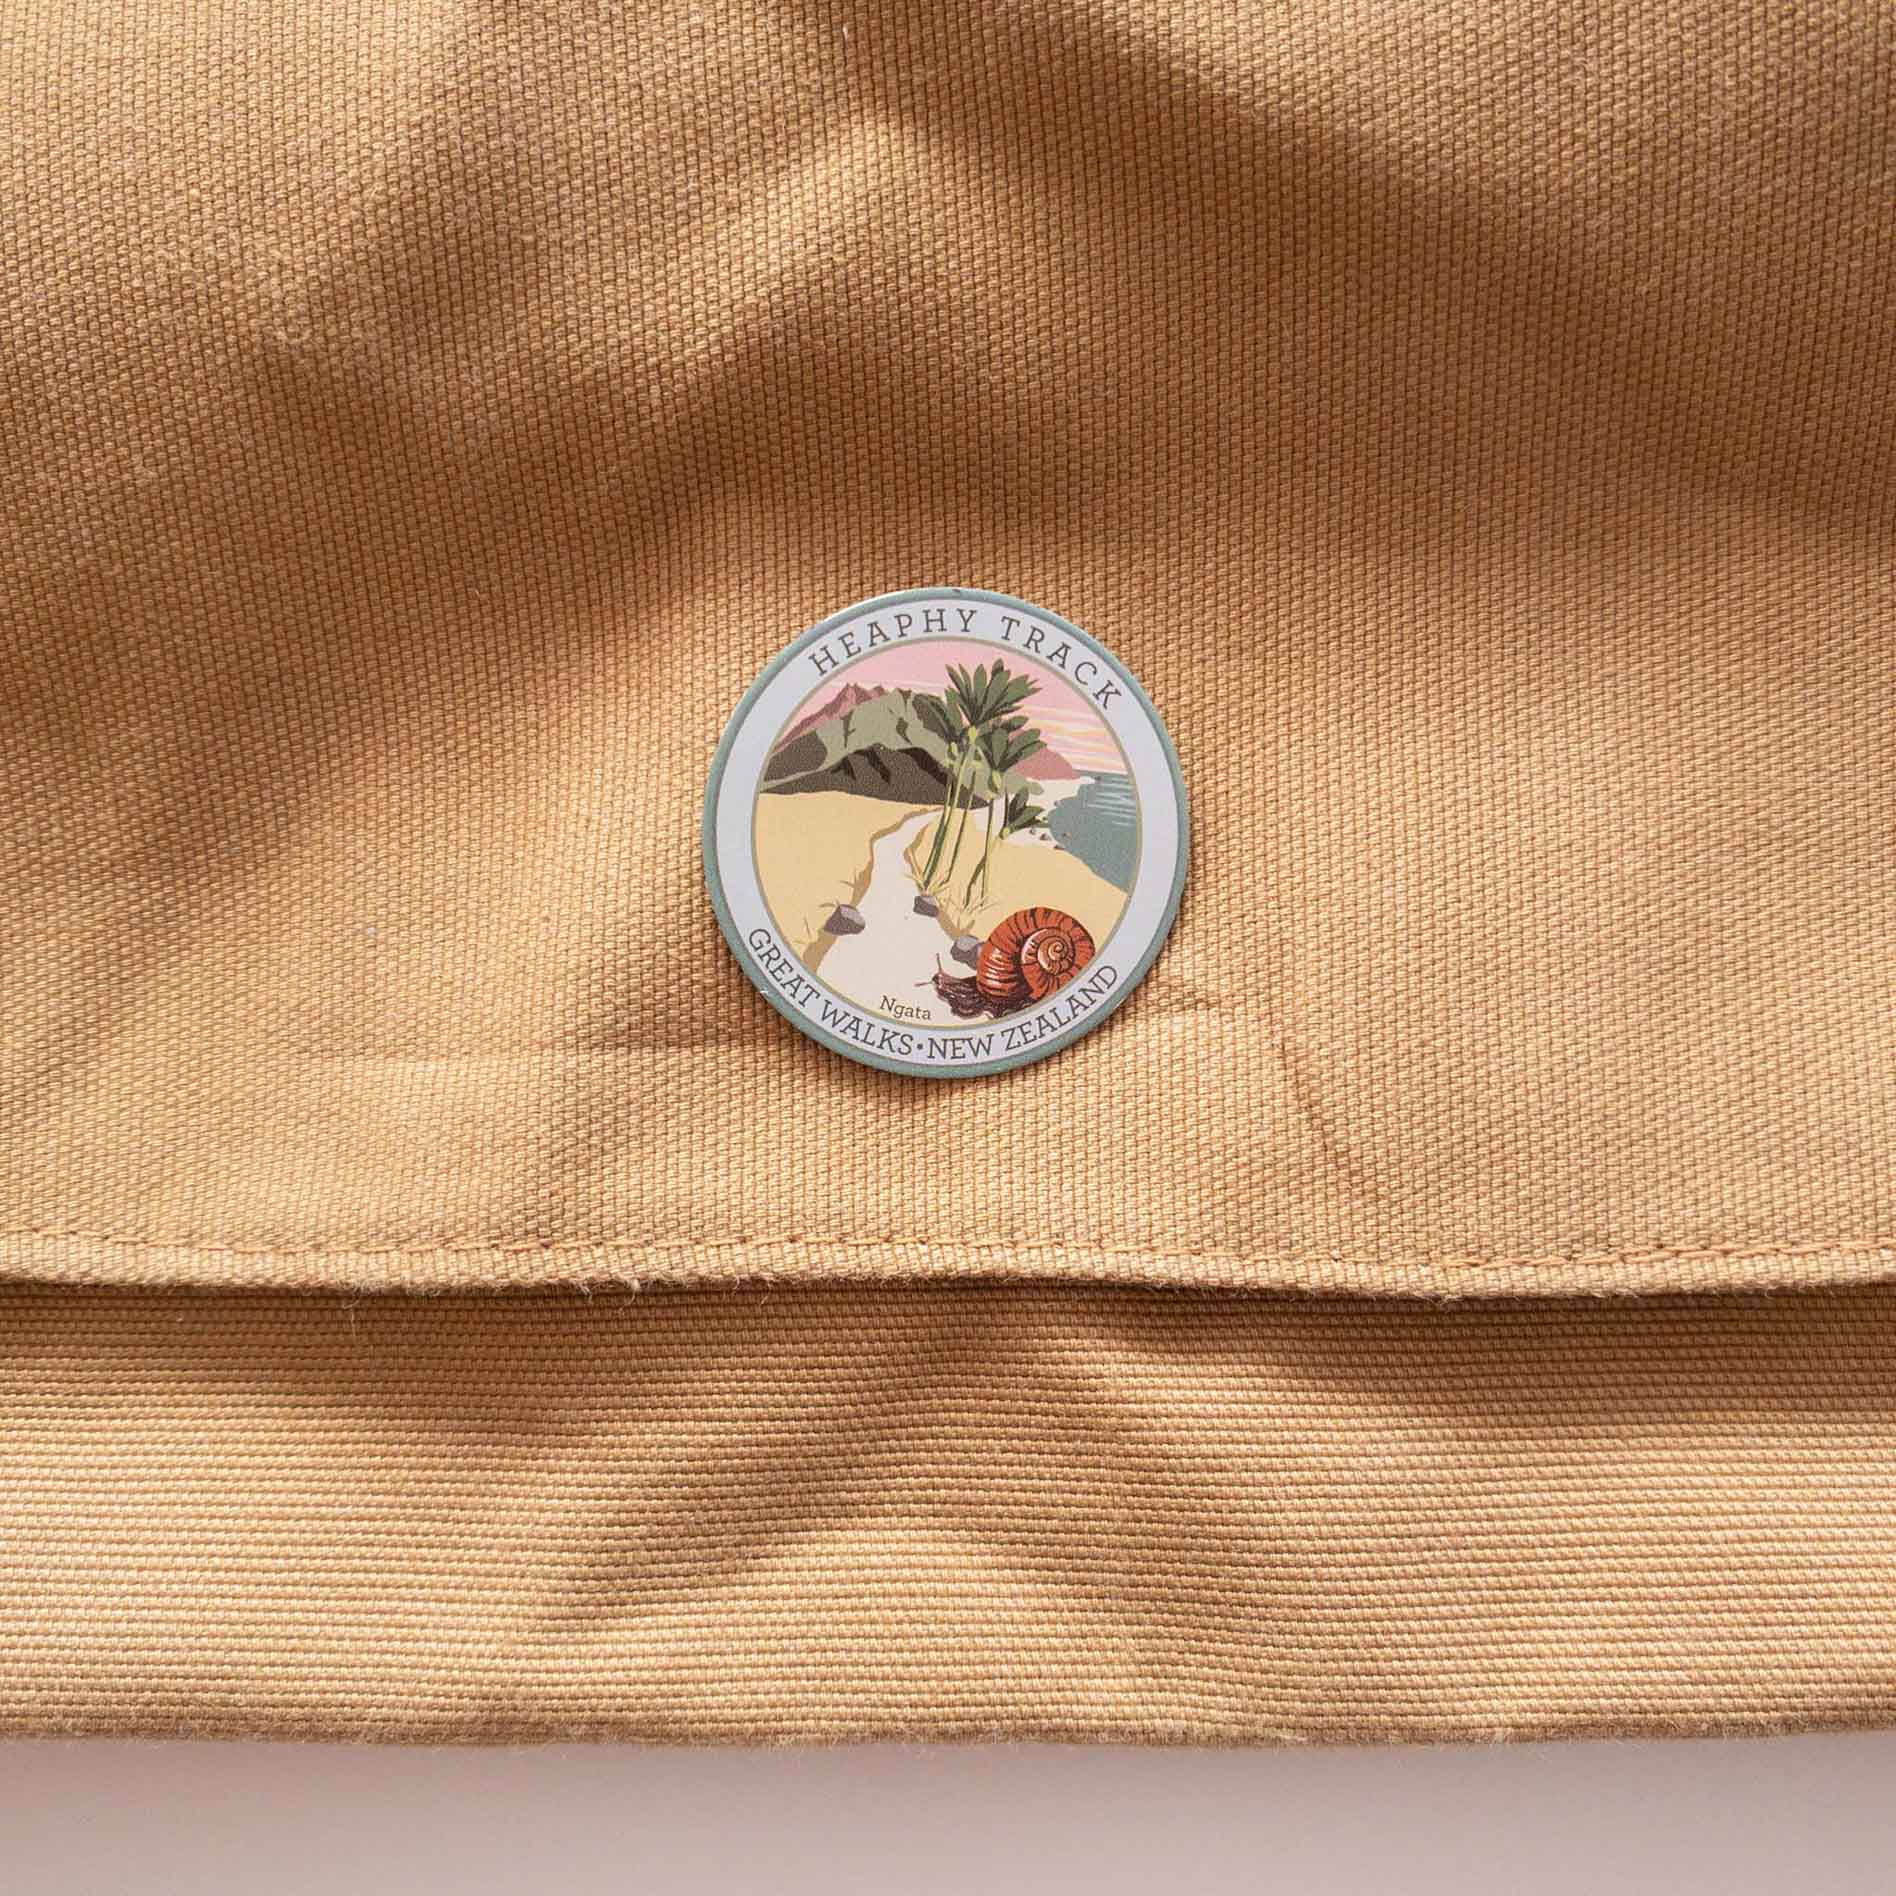 Round Heaphy Track pin, with a snail, nikau palms, green hills and pink sky, on a brown canvas bag.